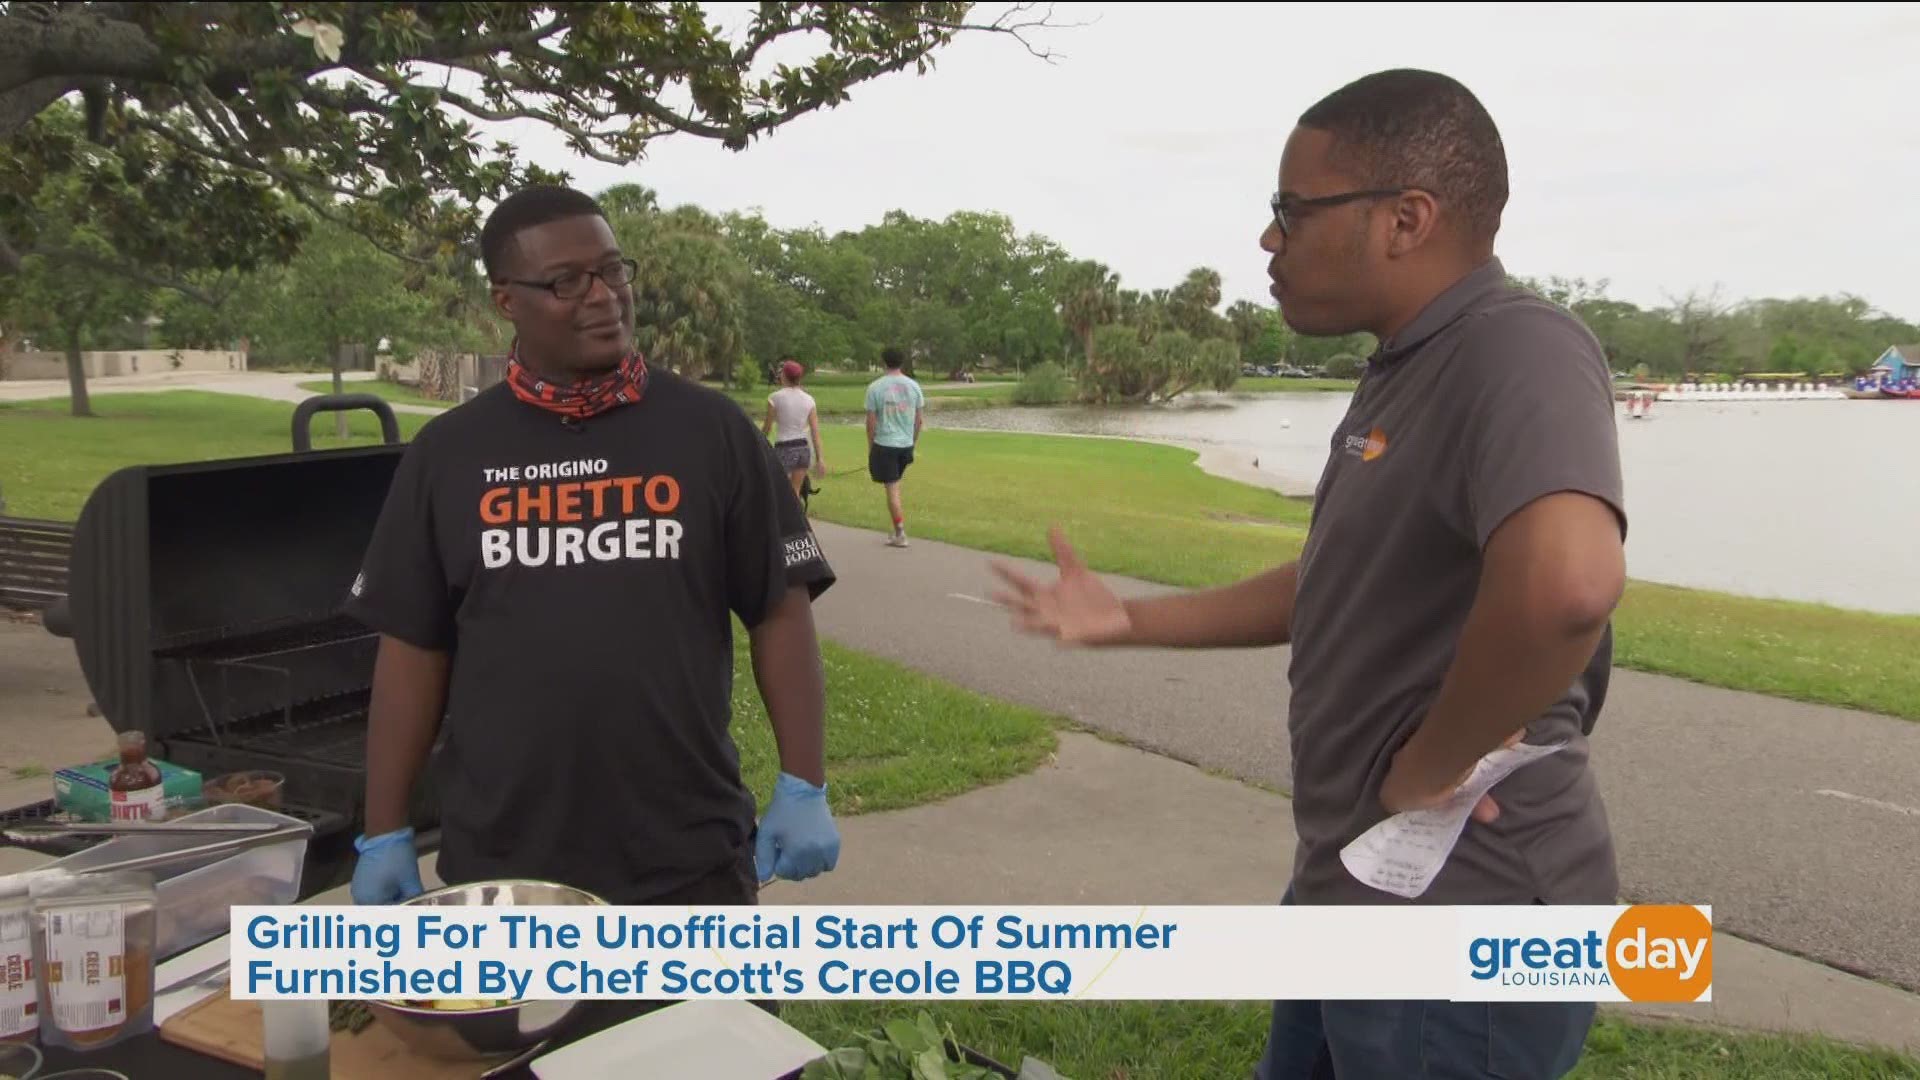 Chef Scott's Creole BBQ shared grilling tips and the  recipe for "the origino ghetto burger."